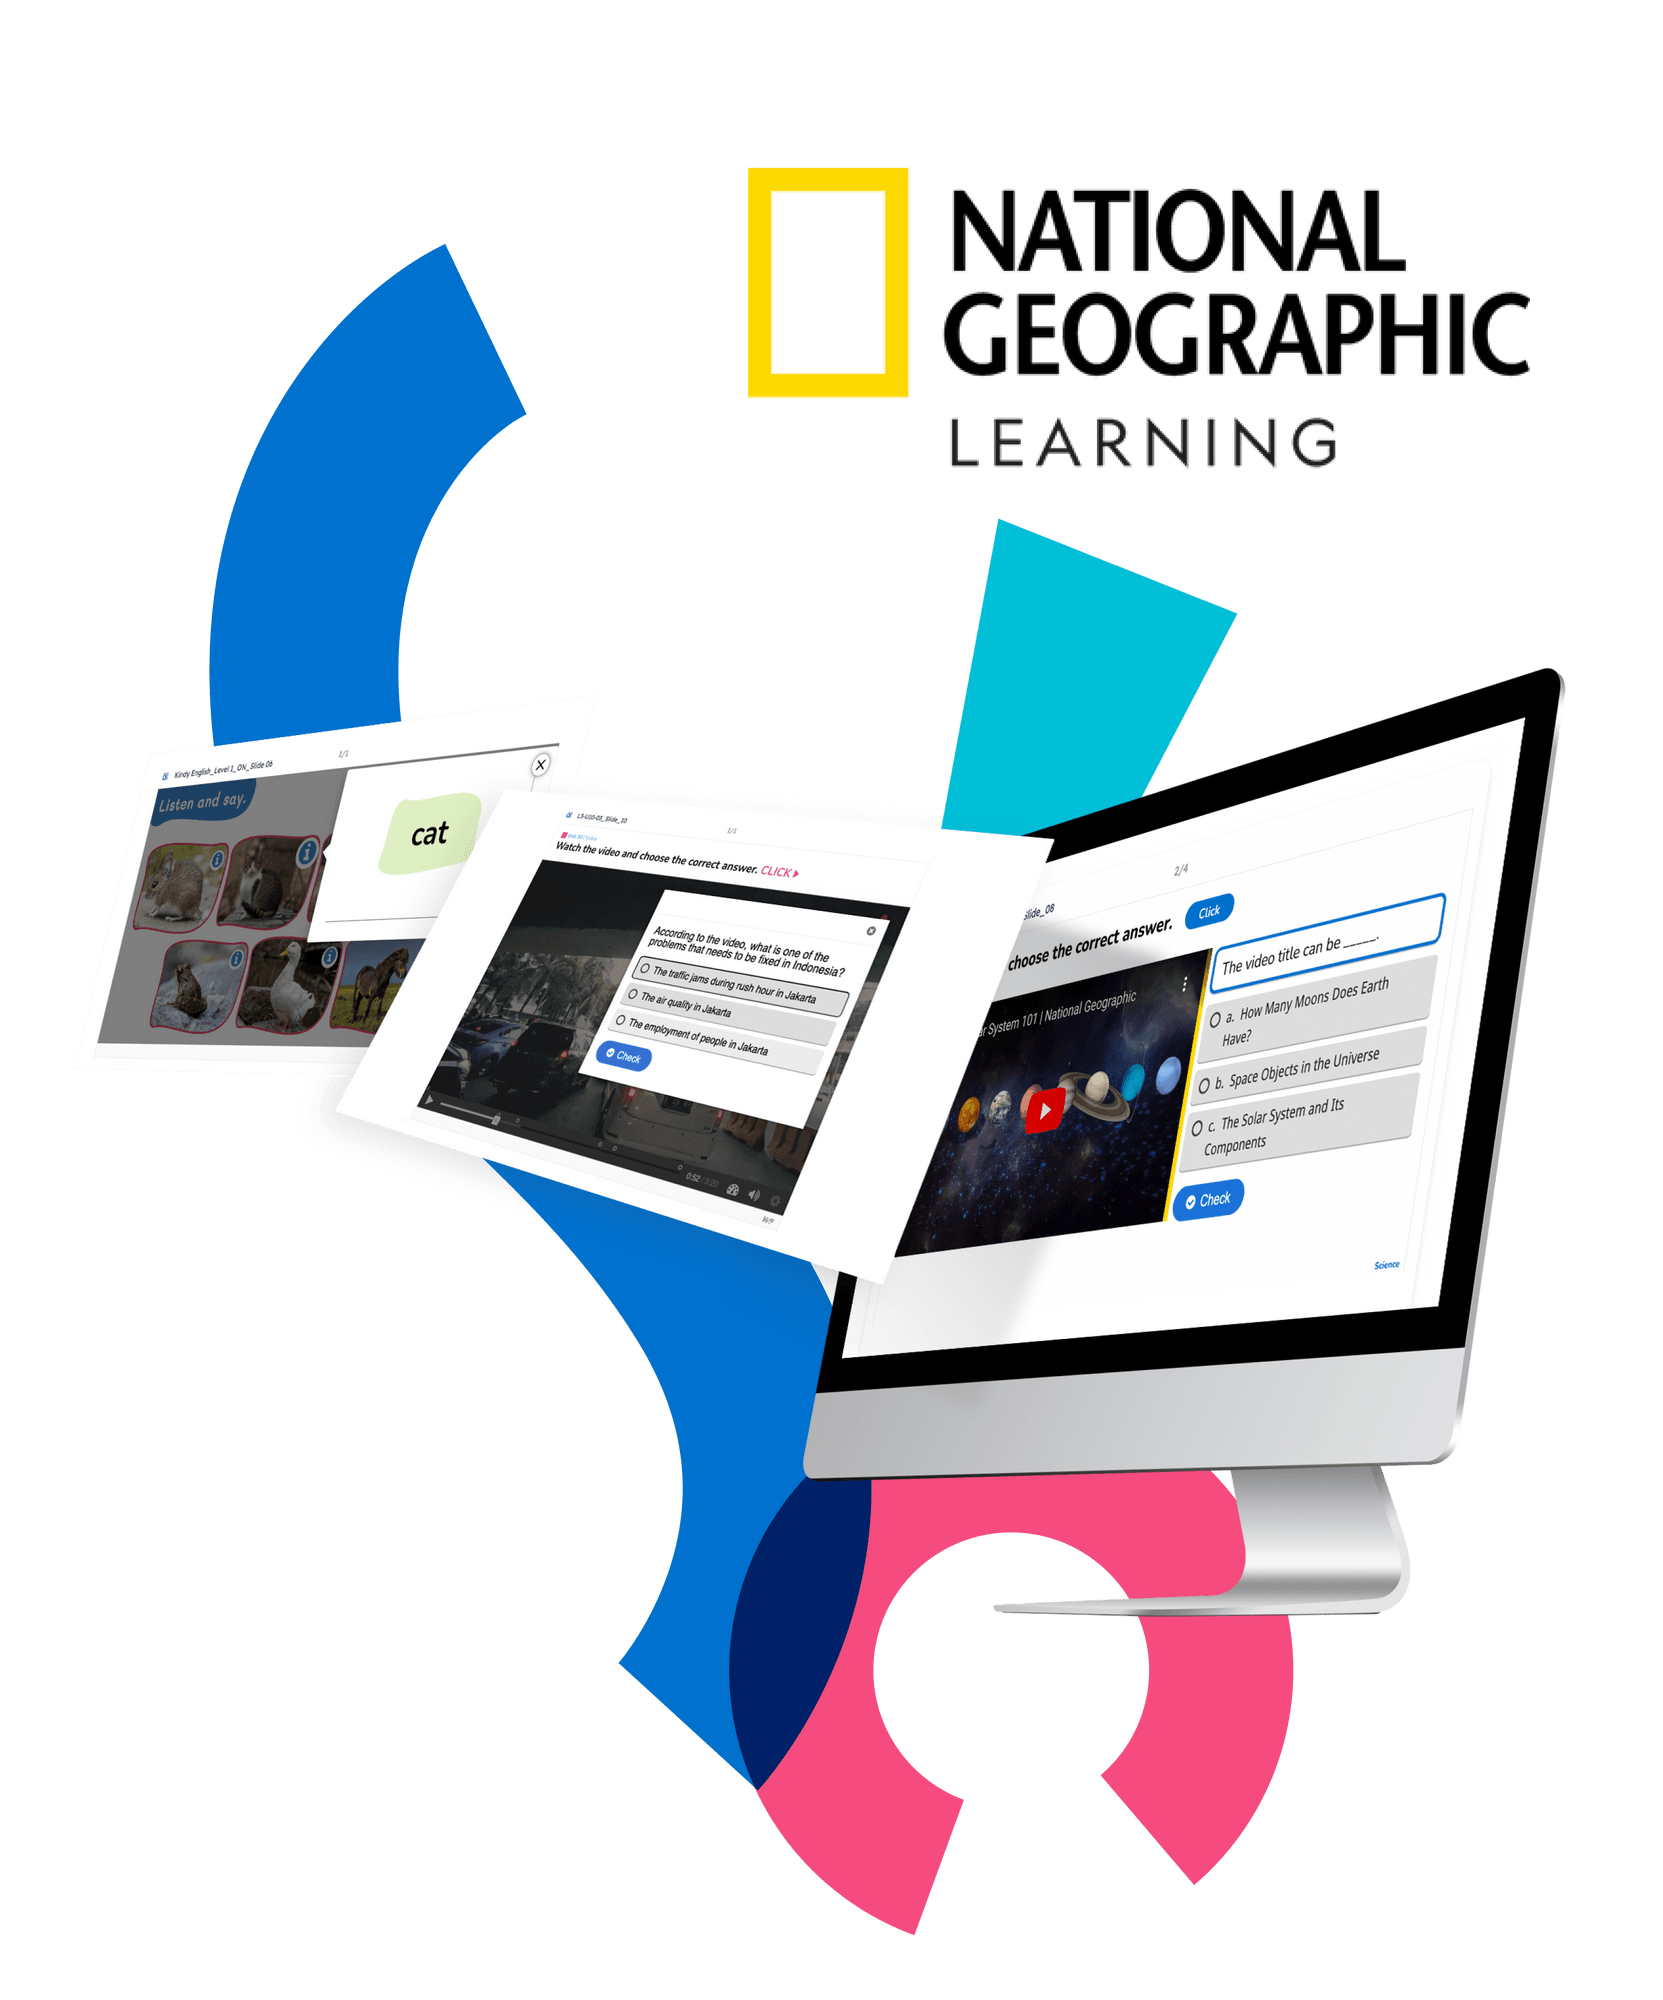 Three screens with interactive H5P content, including quizzes and multimedia. Featuring logo for National Geographic.